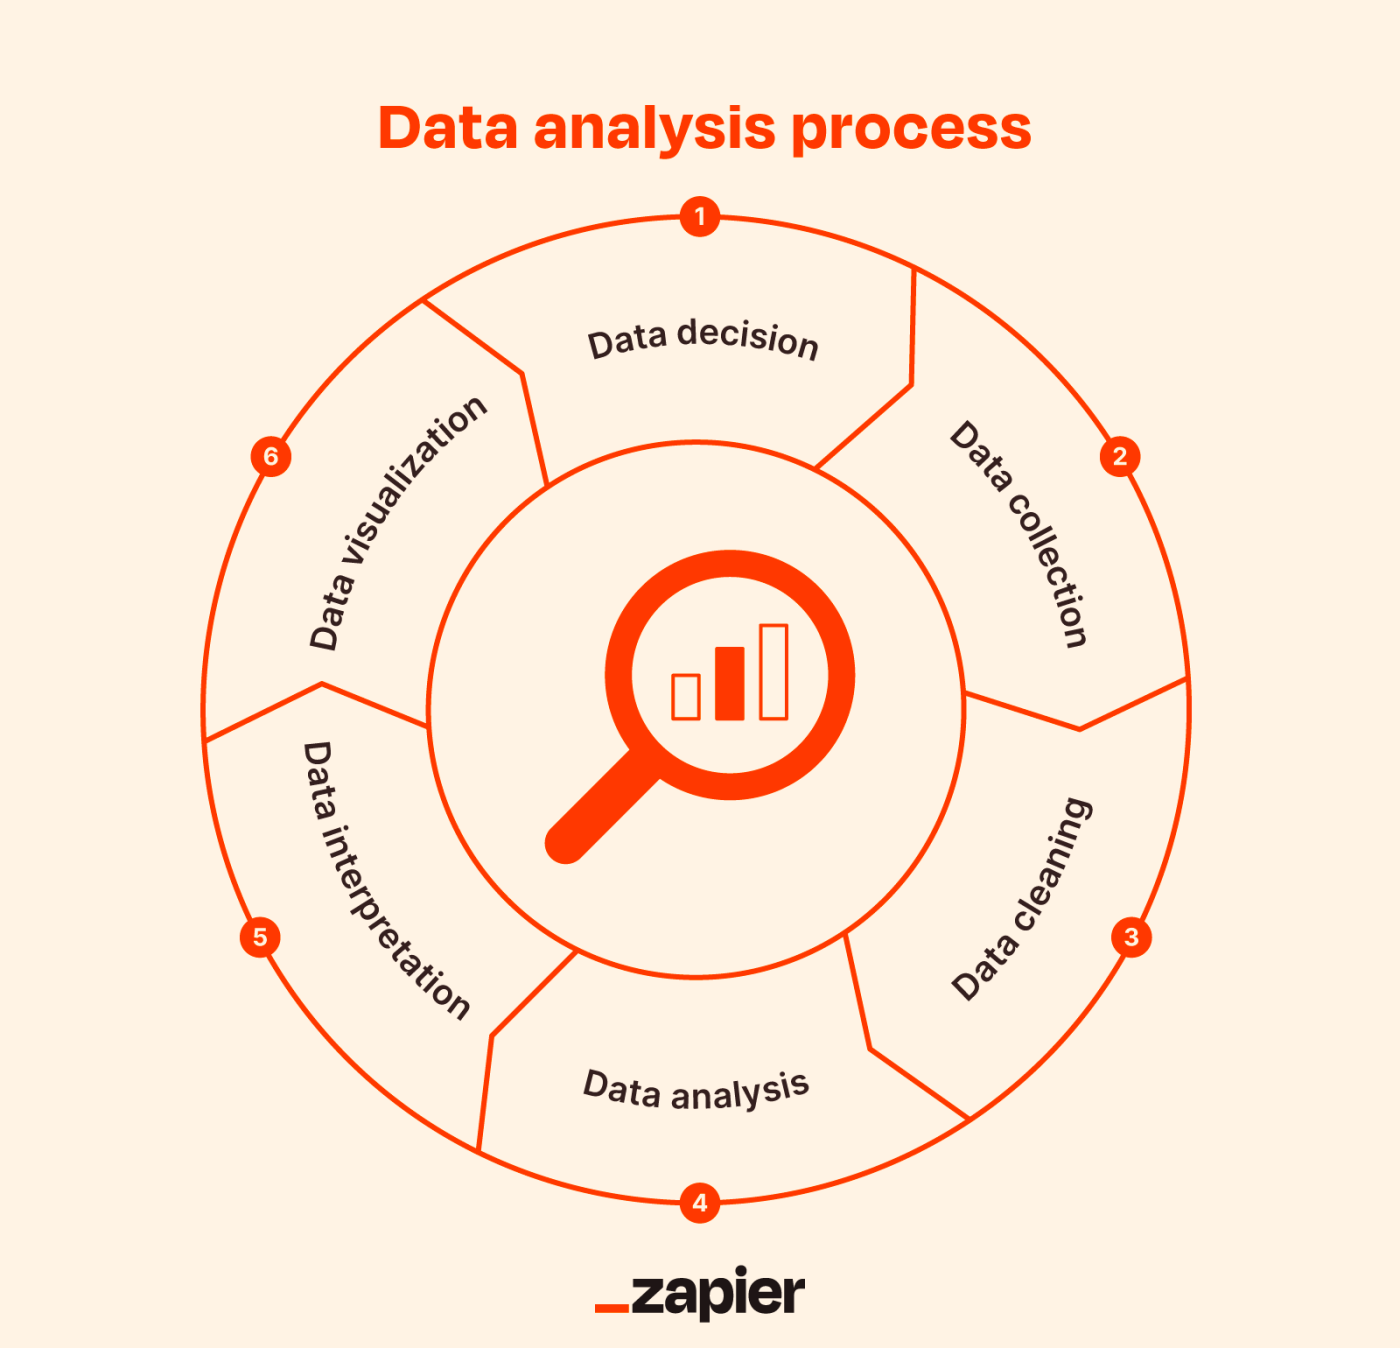 Circle chart with data decision, data collection, data cleaning, data analysis, data interpretation, and data visualization. 